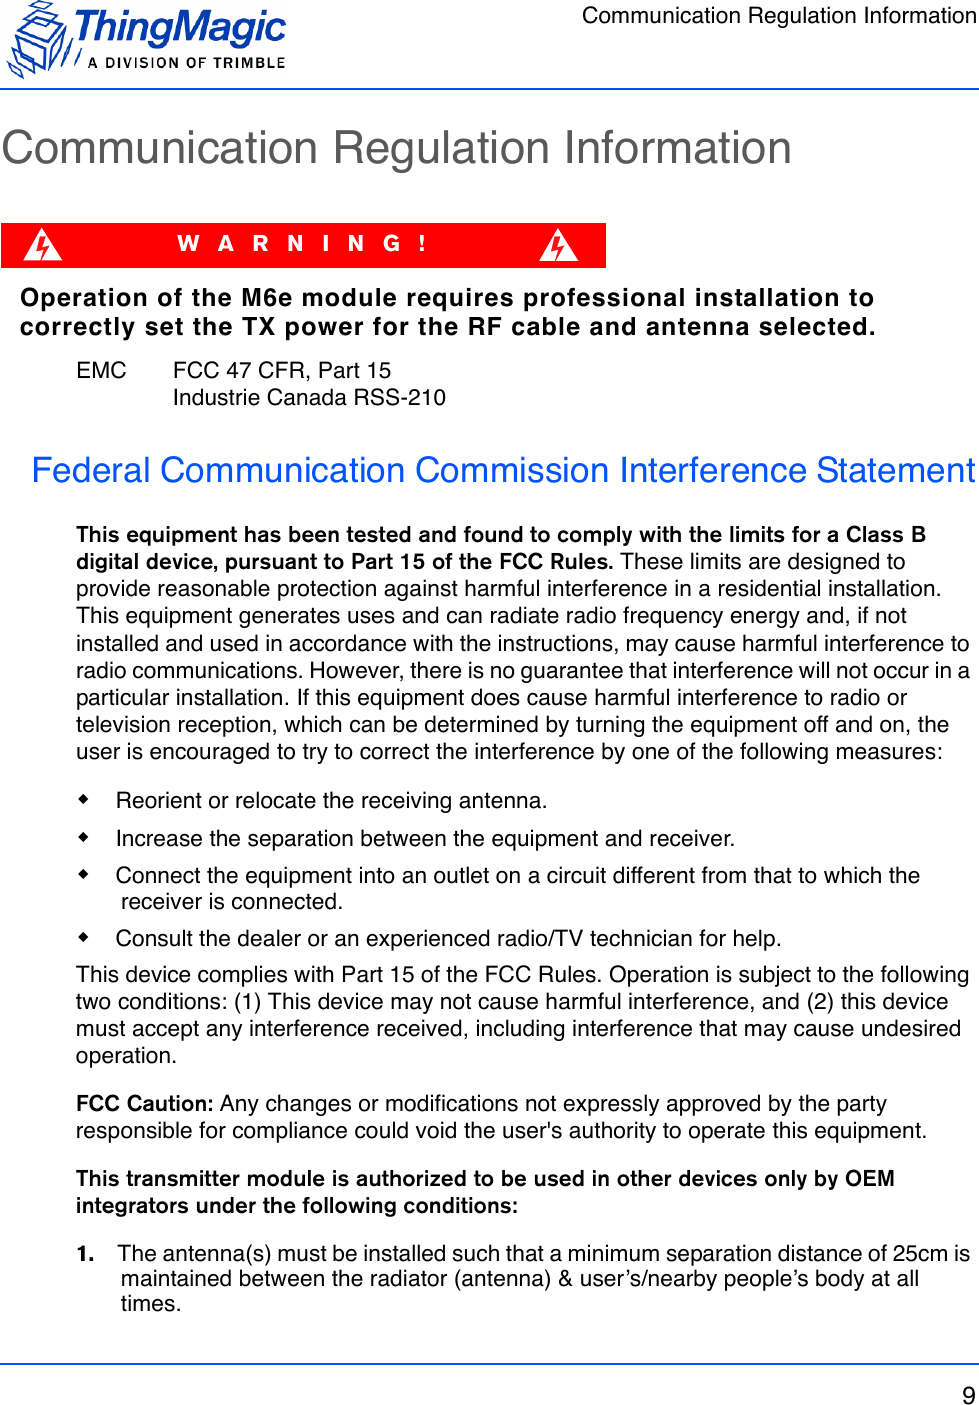 Communication Regulation Information9Communication Regulation InformationWARNING!Operation of the M6e module requires professional installation to correctly set the TX power for the RF cable and antenna selected.EMC  FCC 47 CFR, Part 15Industrie Canada RSS-210Federal Communication Commission Interference StatementThis equipment has been tested and found to comply with the limits for a Class B digital device, pursuant to Part 15 of the FCC Rules. These limits are designed to provide reasonable protection against harmful interference in a residential installation. This equipment generates uses and can radiate radio frequency energy and, if not installed and used in accordance with the instructions, may cause harmful interference to radio communications. However, there is no guarantee that interference will not occur in a particular installation. If this equipment does cause harmful interference to radio or television reception, which can be determined by turning the equipment off and on, the user is encouraged to try to correct the interference by one of the following measures: Reorient or relocate the receiving antenna. Increase the separation between the equipment and receiver. Connect the equipment into an outlet on a circuit different from that to which the receiver is connected. Consult the dealer or an experienced radio/TV technician for help.This device complies with Part 15 of the FCC Rules. Operation is subject to the following two conditions: (1) This device may not cause harmful interference, and (2) this device must accept any interference received, including interference that may cause undesired operation.FCC Caution: Any changes or modifications not expressly approved by the party responsible for compliance could void the user&apos;s authority to operate this equipment.This transmitter module is authorized to be used in other devices only by OEM integrators under the following conditions:1.    The antenna(s) must be installed such that a minimum separation distance of 25cm is maintained between the radiator (antenna) &amp; user’s/nearby people’s body at all times.